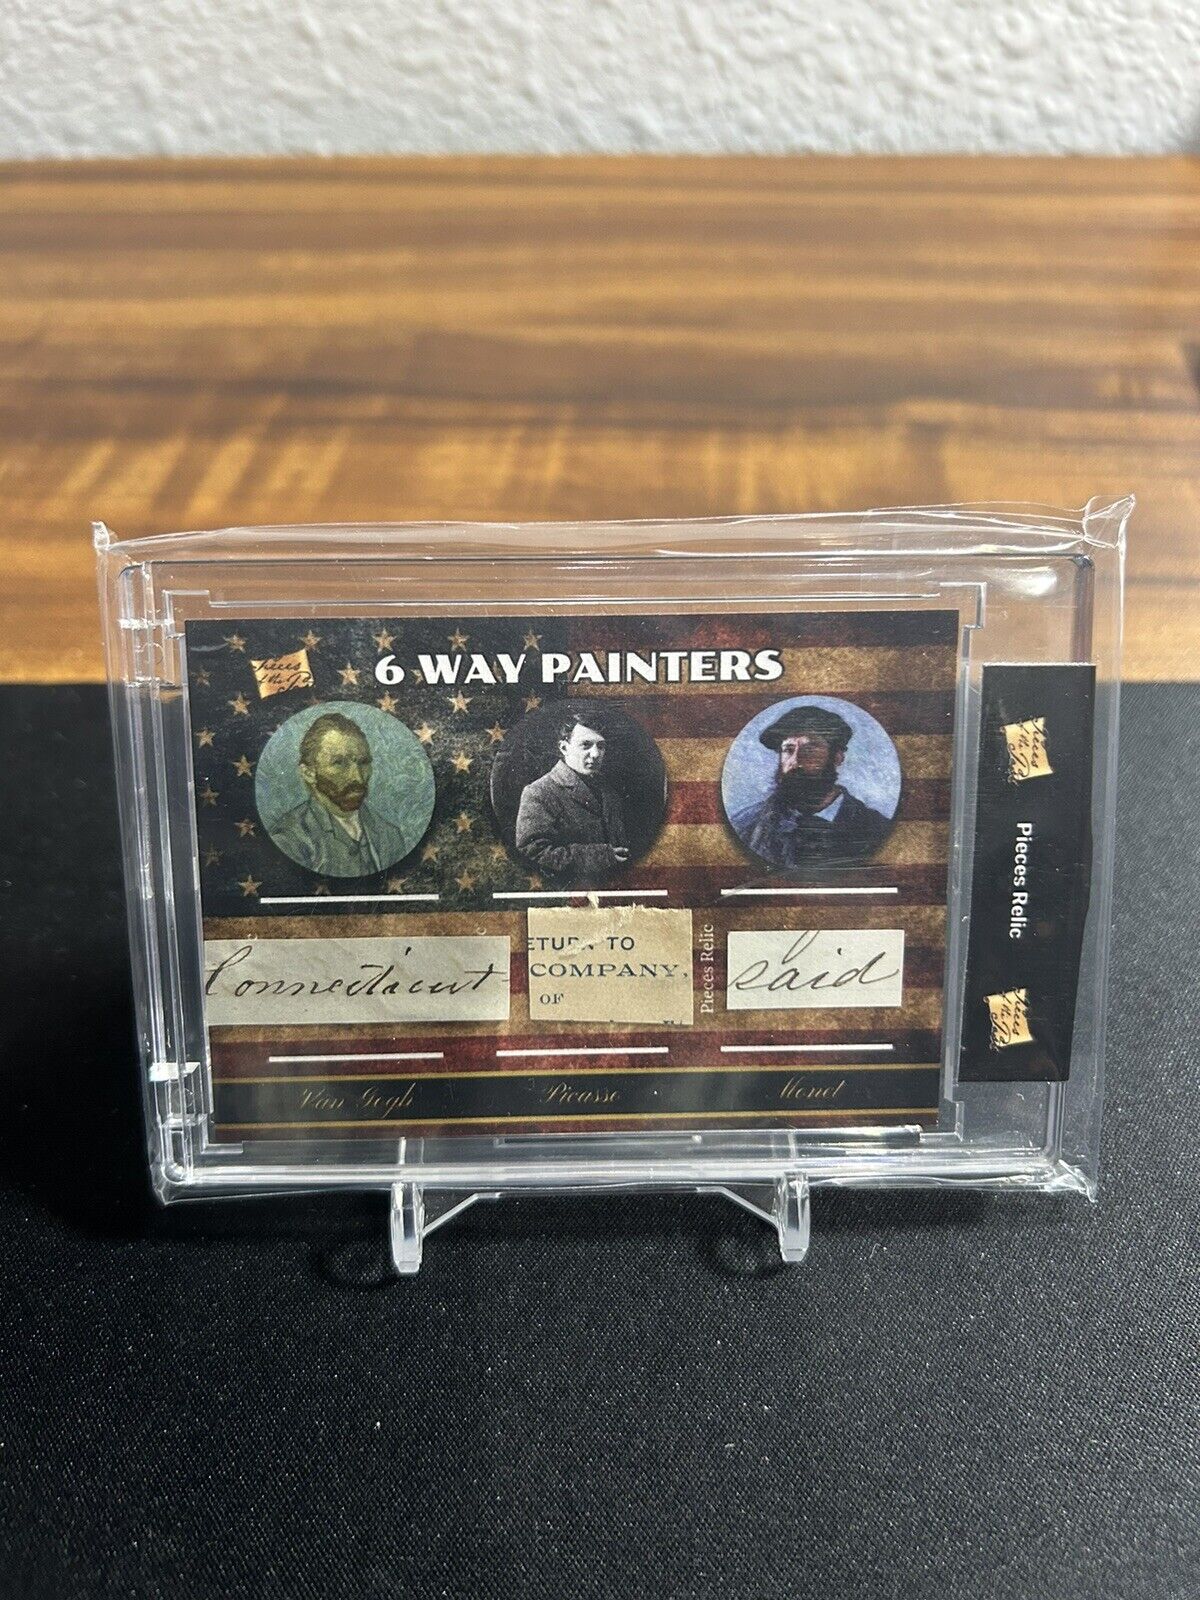 2022 The Bar Pieces of the Past - 6 way Painters Relic